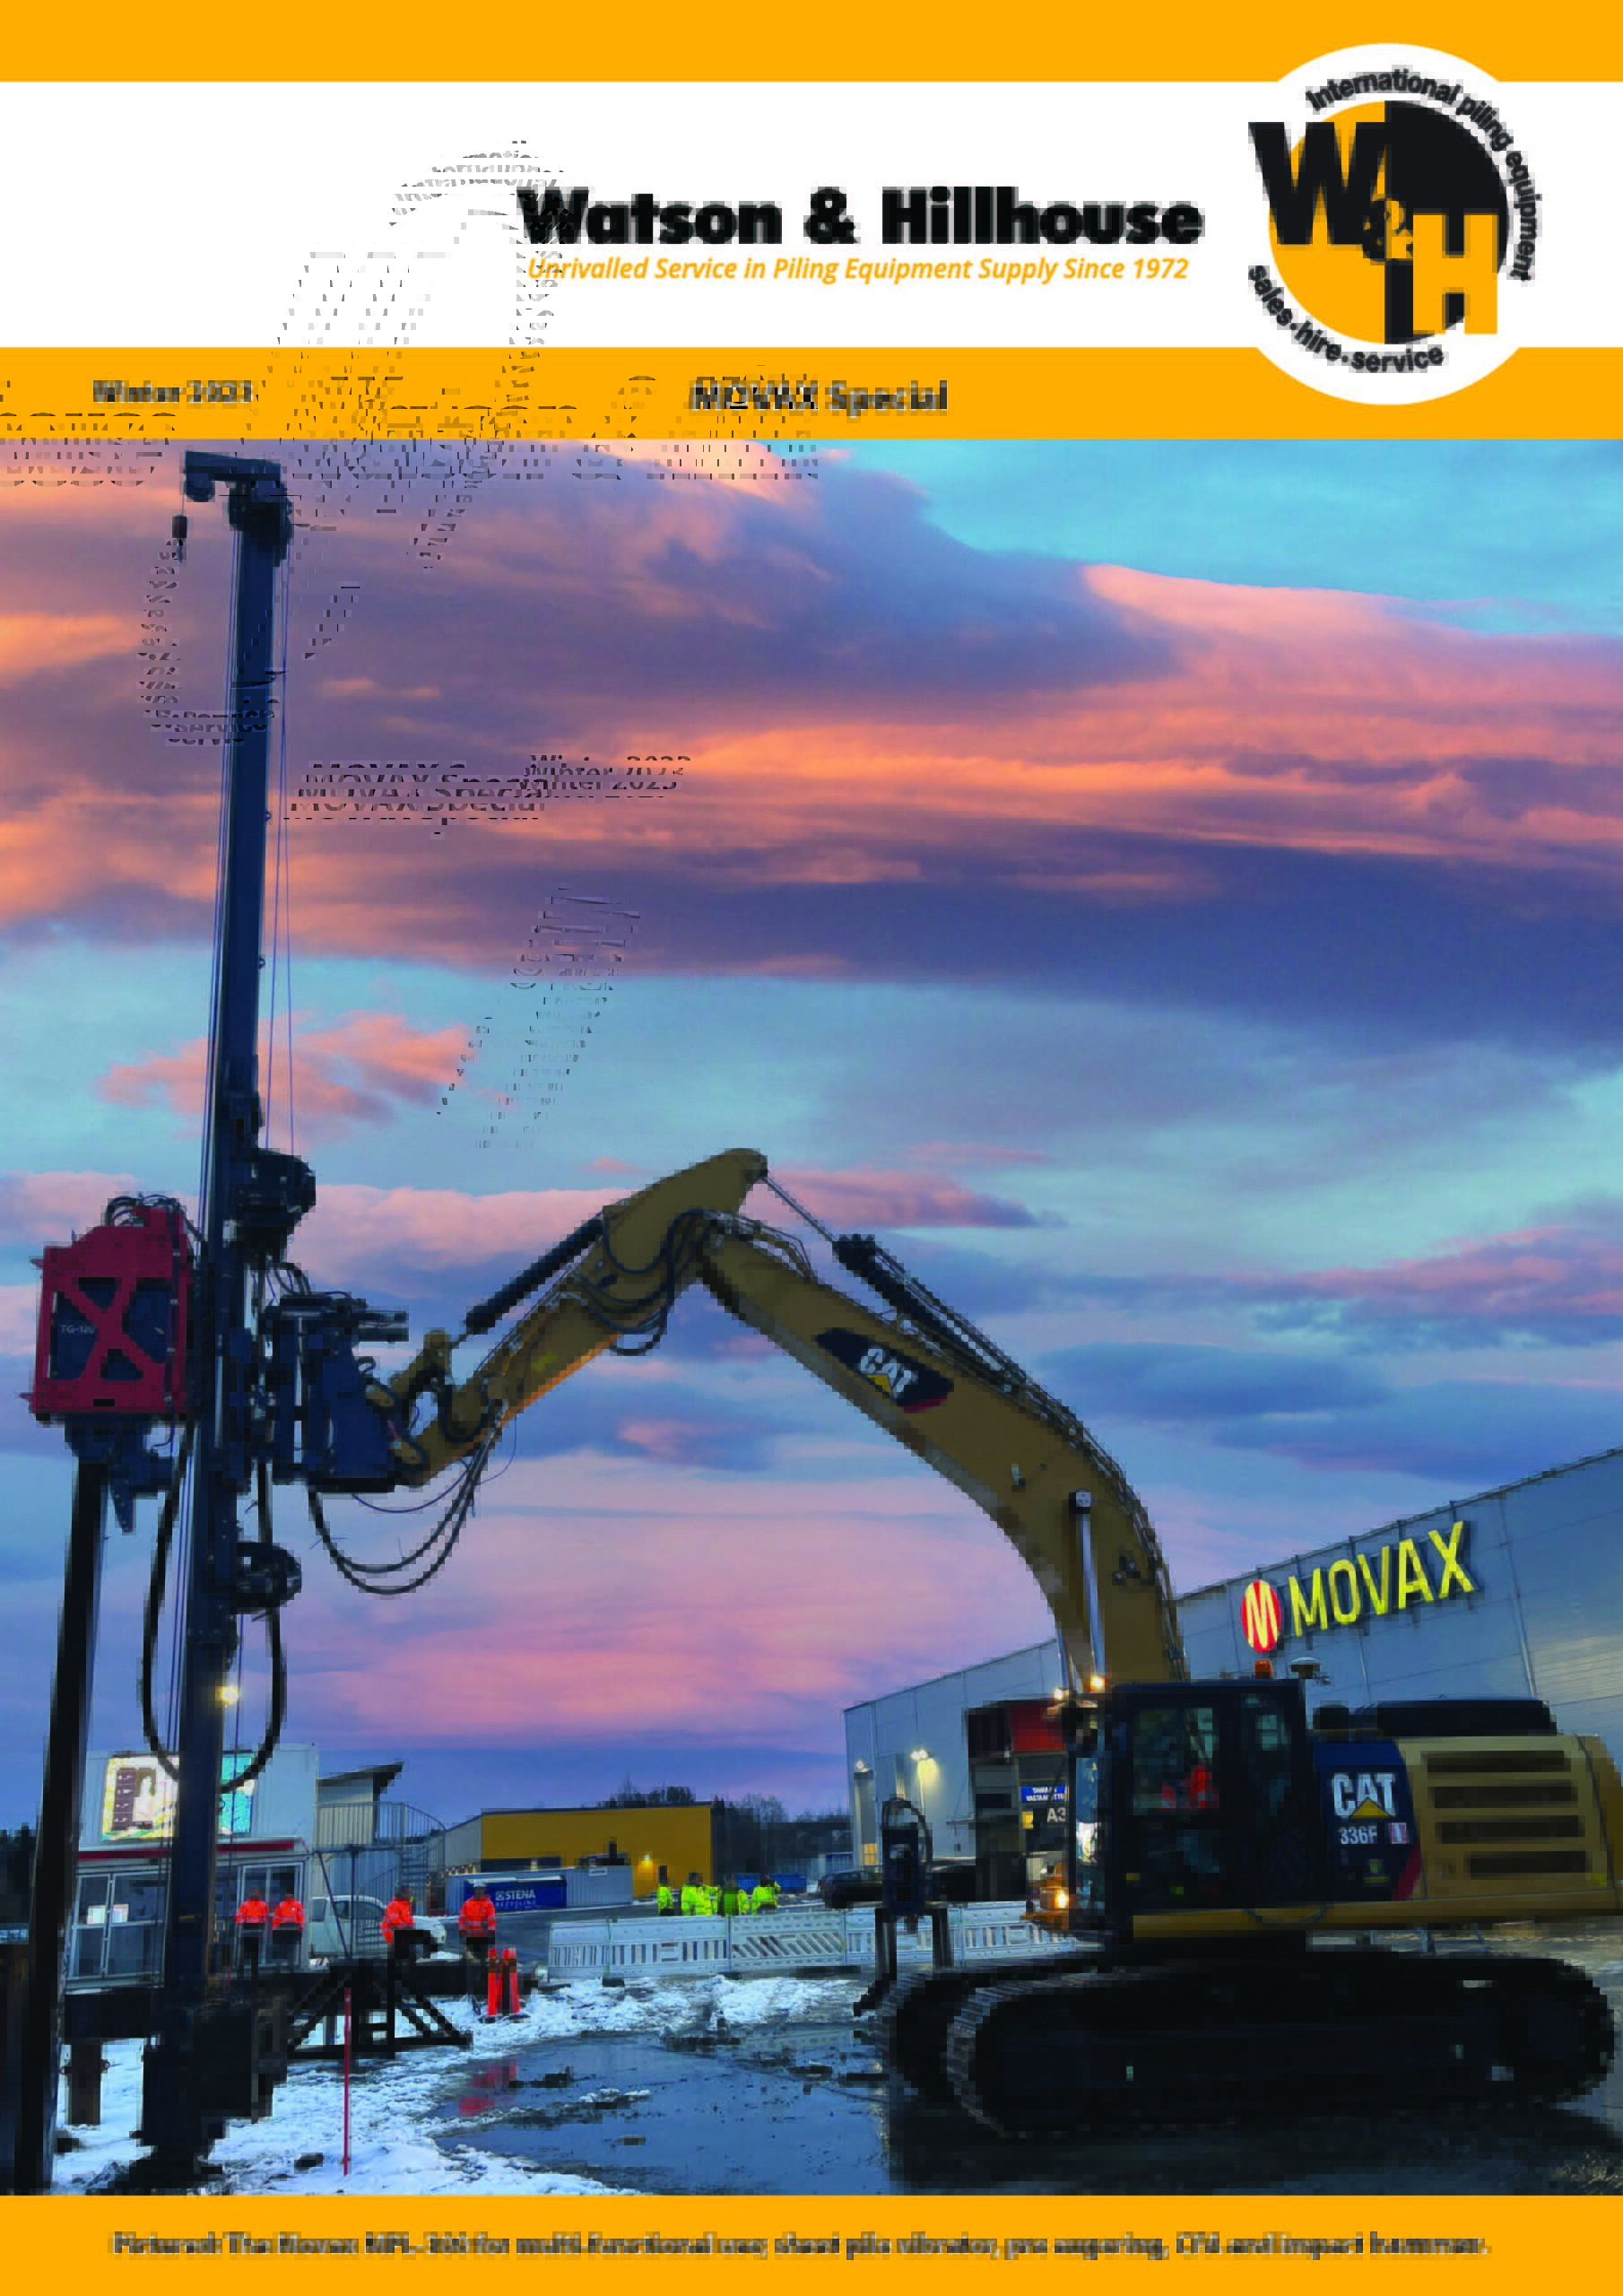 Image shows front cover of the Winter 2023 Watson & Hillhouse newsletter which has an excavator on the front page with the Movax MPL-300 for multi-functional use; sheet pile vibrator, pre augering, CFA and impact hammer.